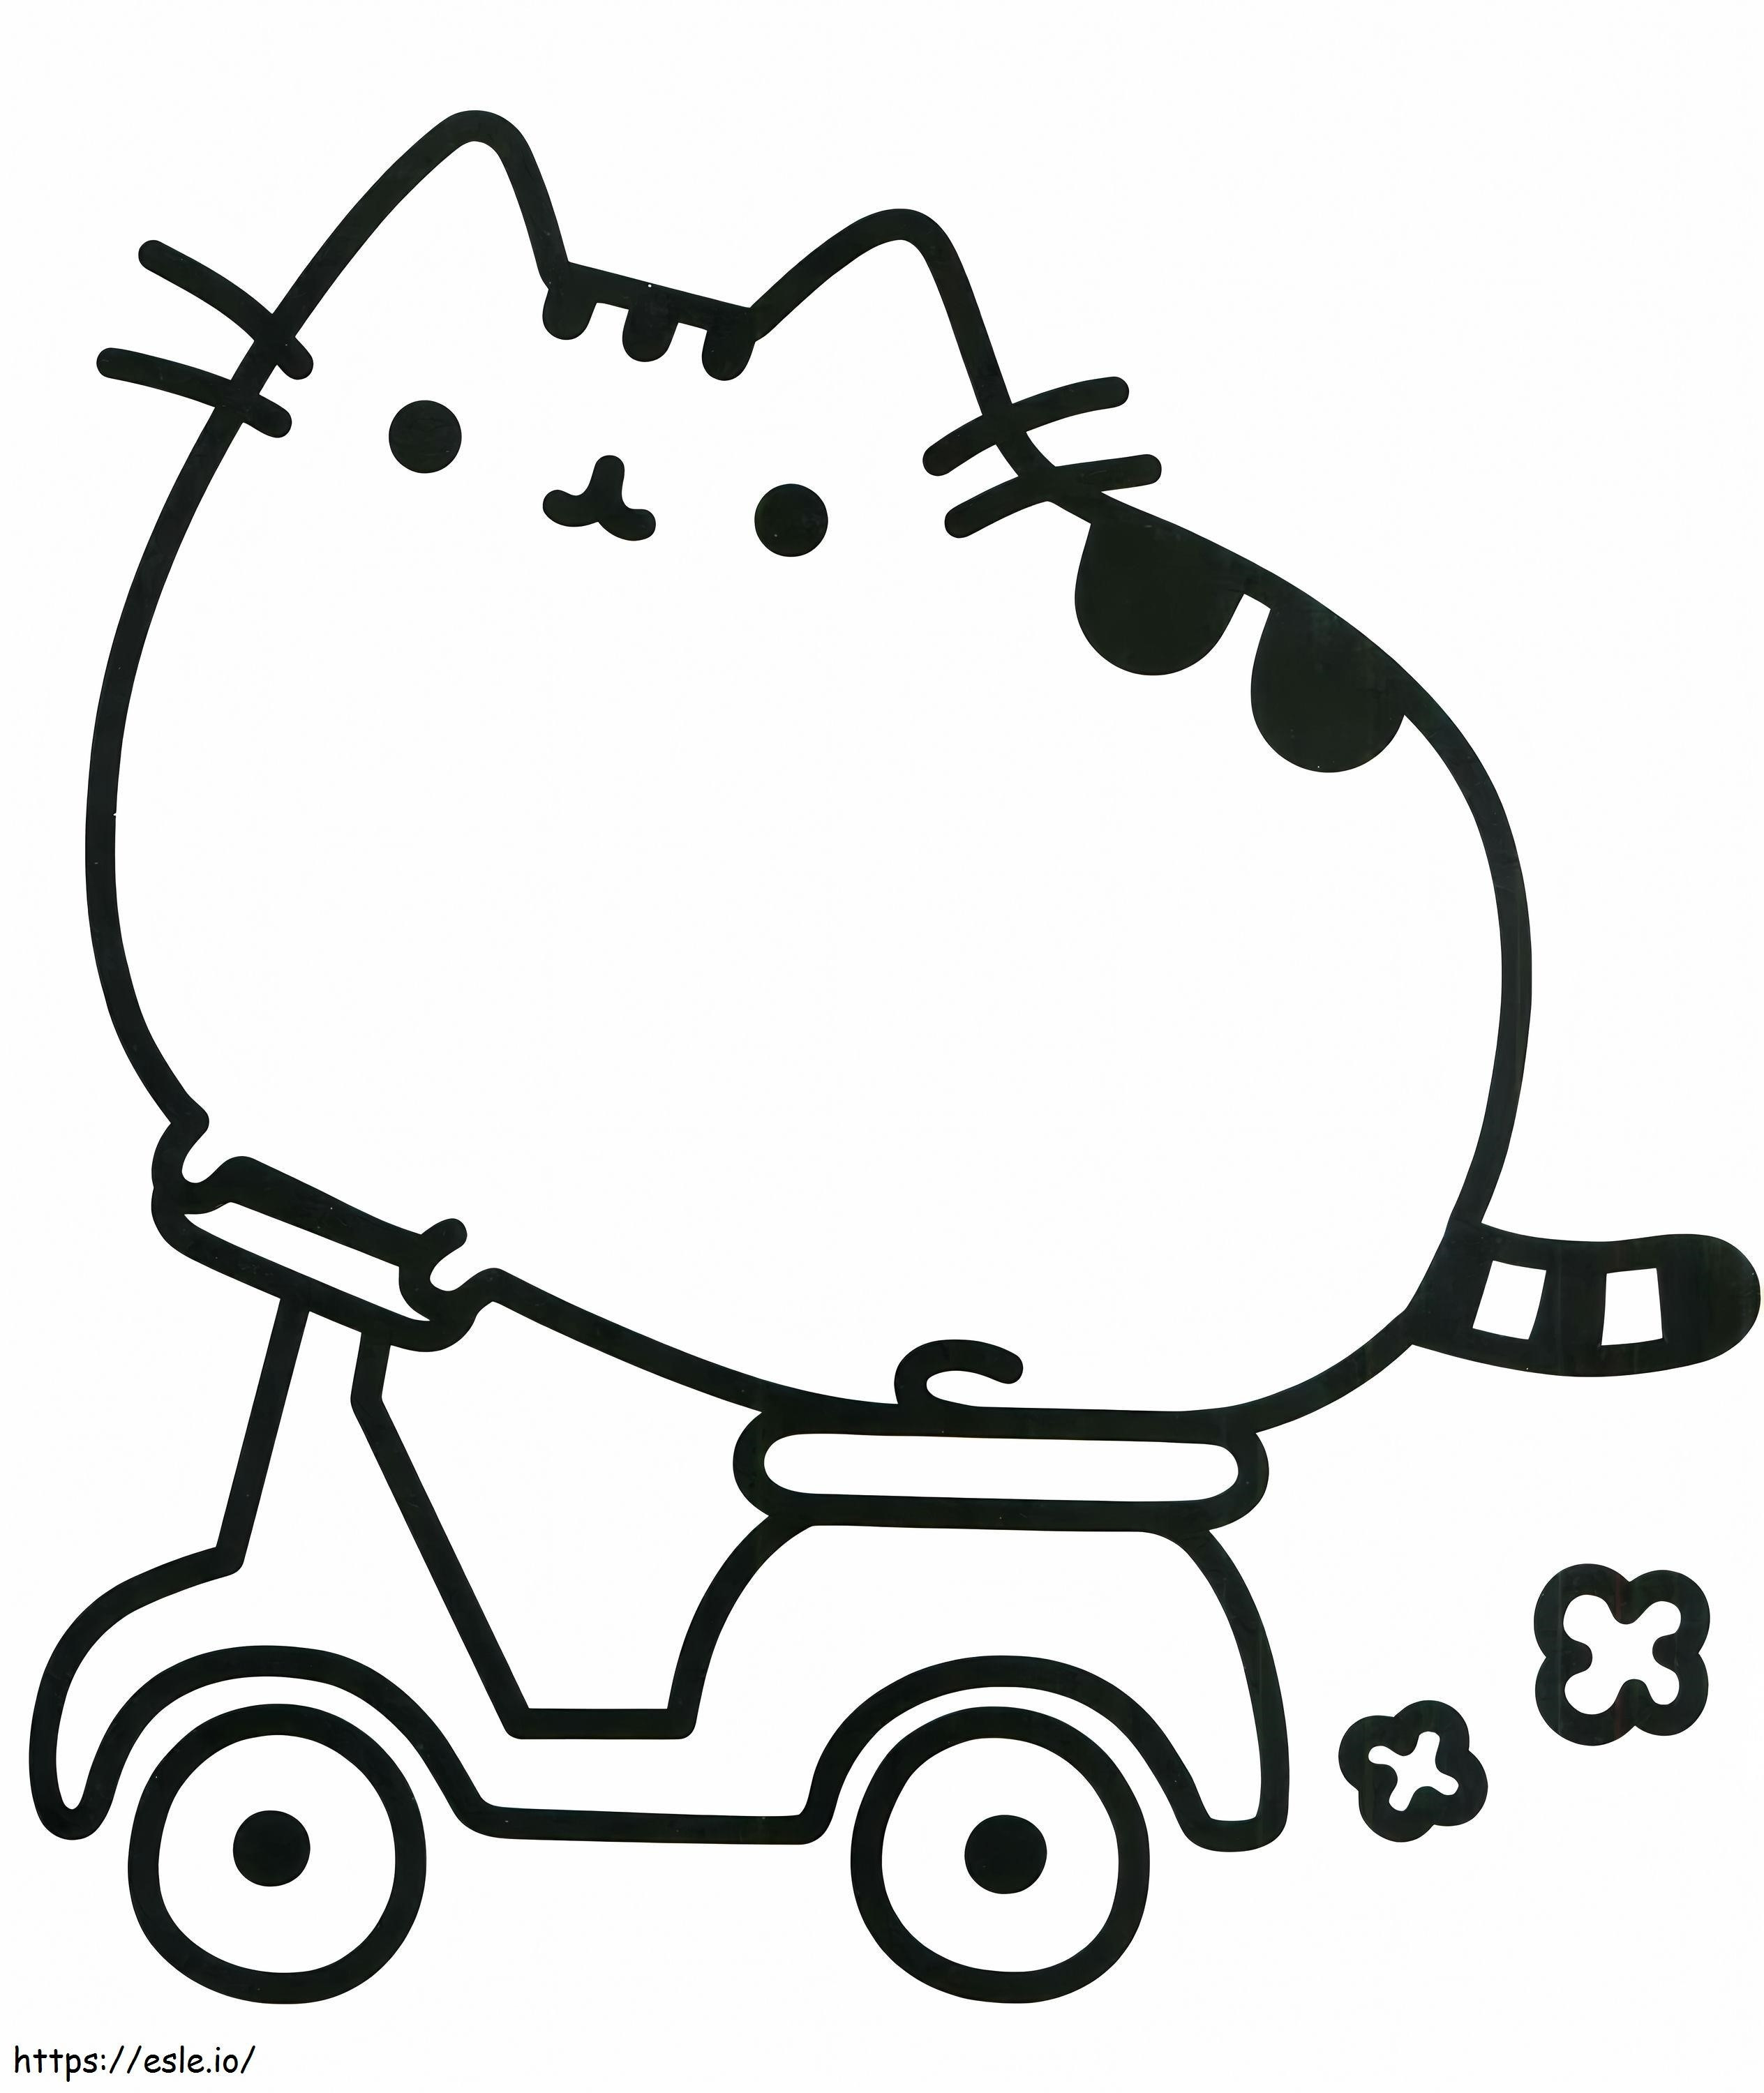 1528171524 Pusheen Cat On A Motorbike coloring page